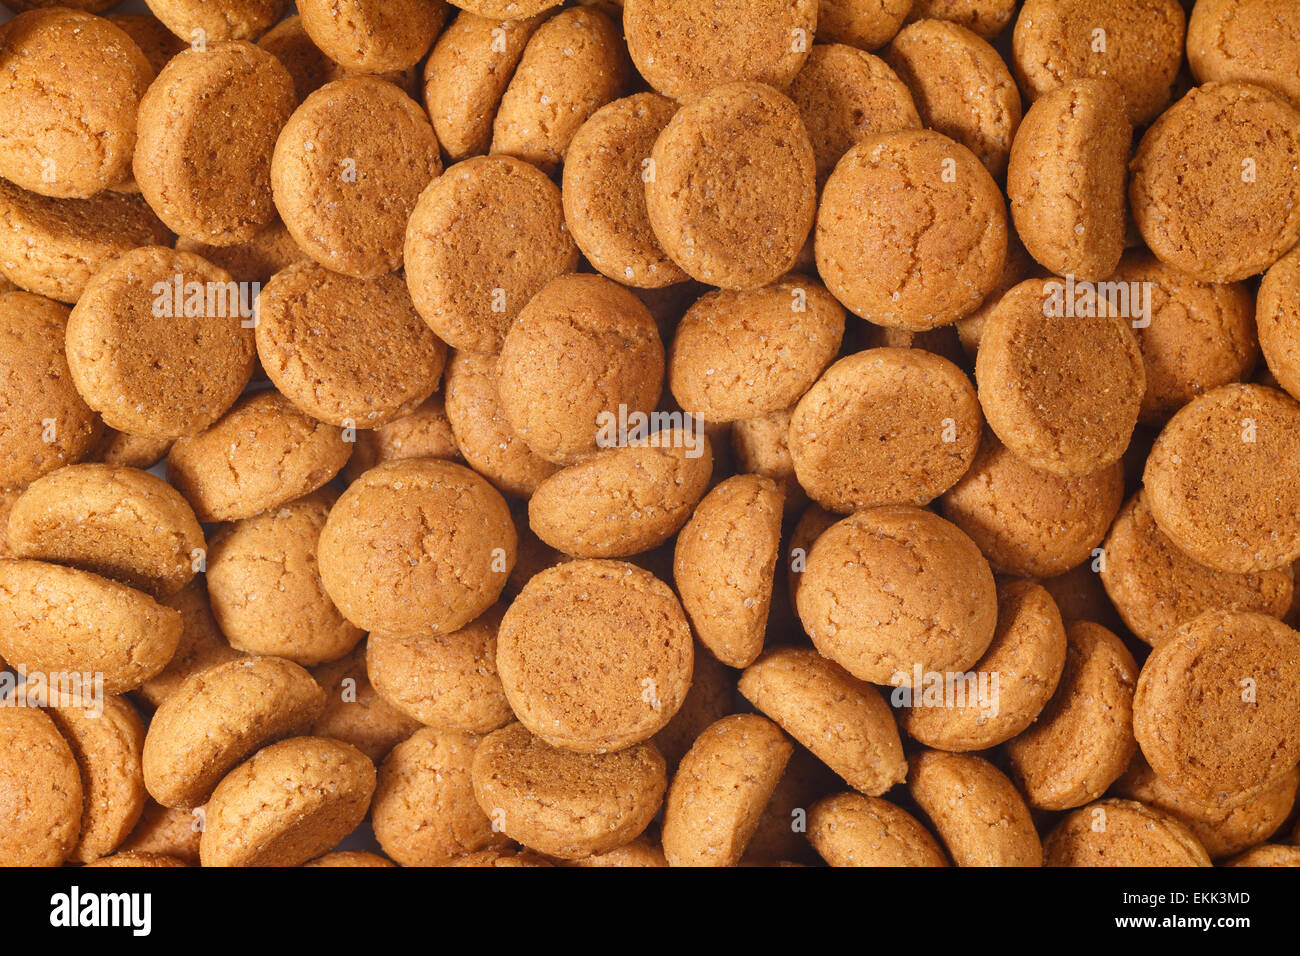 Pile of pepernoten, ginger nuts. A dutch treat for Sinterklaas celebration on 5 december. Event in Holland, Netherlands. Stock Photo